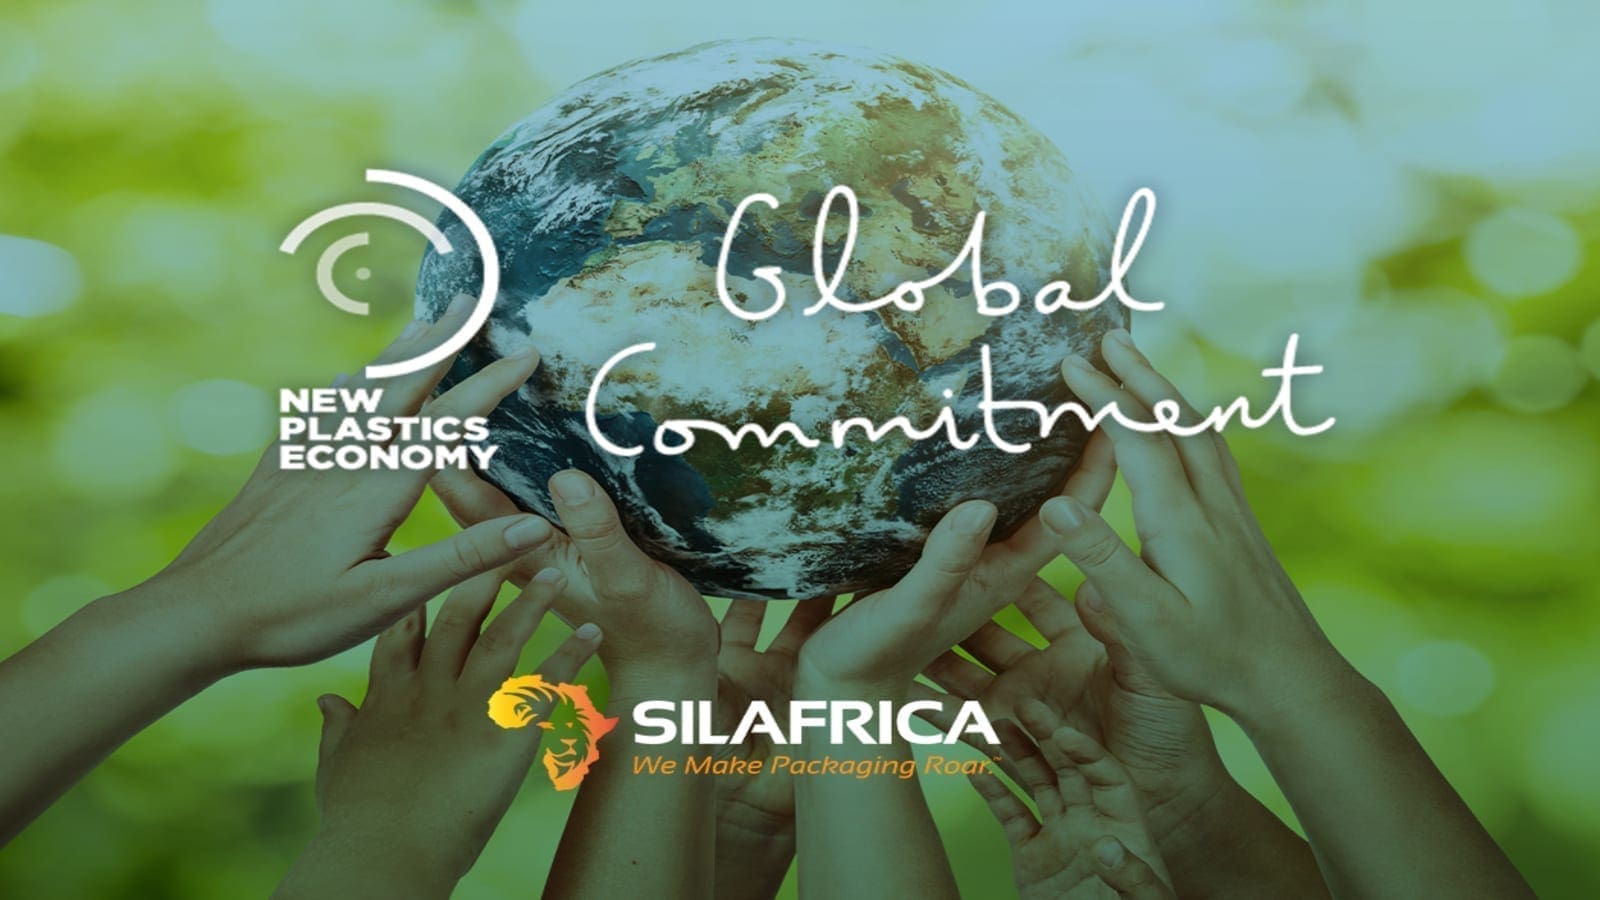 Silafrica partners with Ellen MacArthur Foundation to combat plastic waste